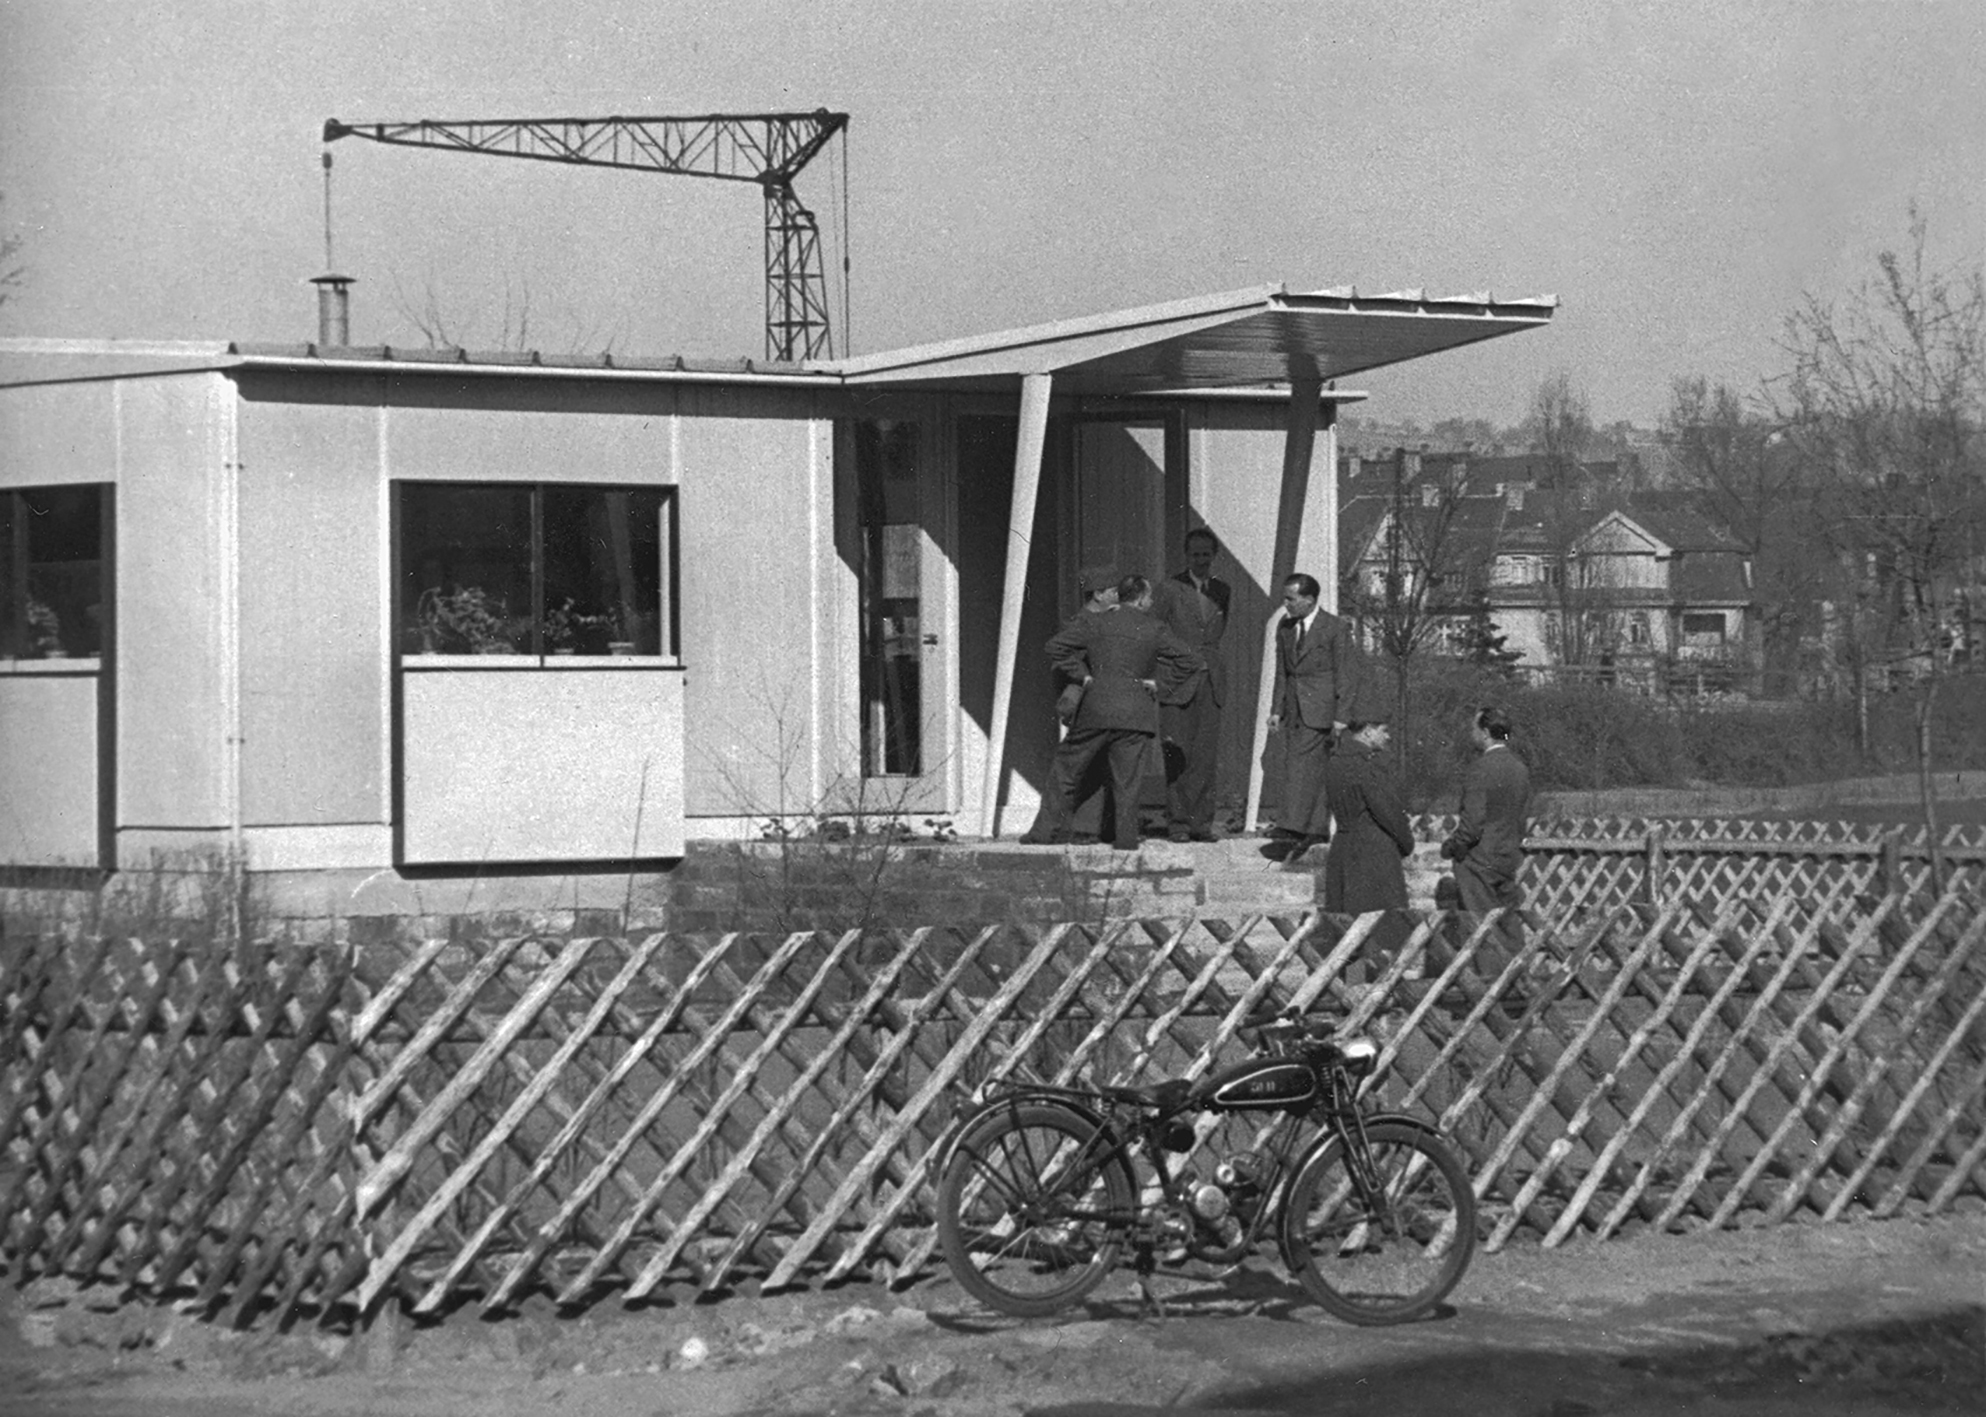 8x8 Demountable house, 1947. Display house assembled in Sarrebrücken and used as a social welfare by the French military government.